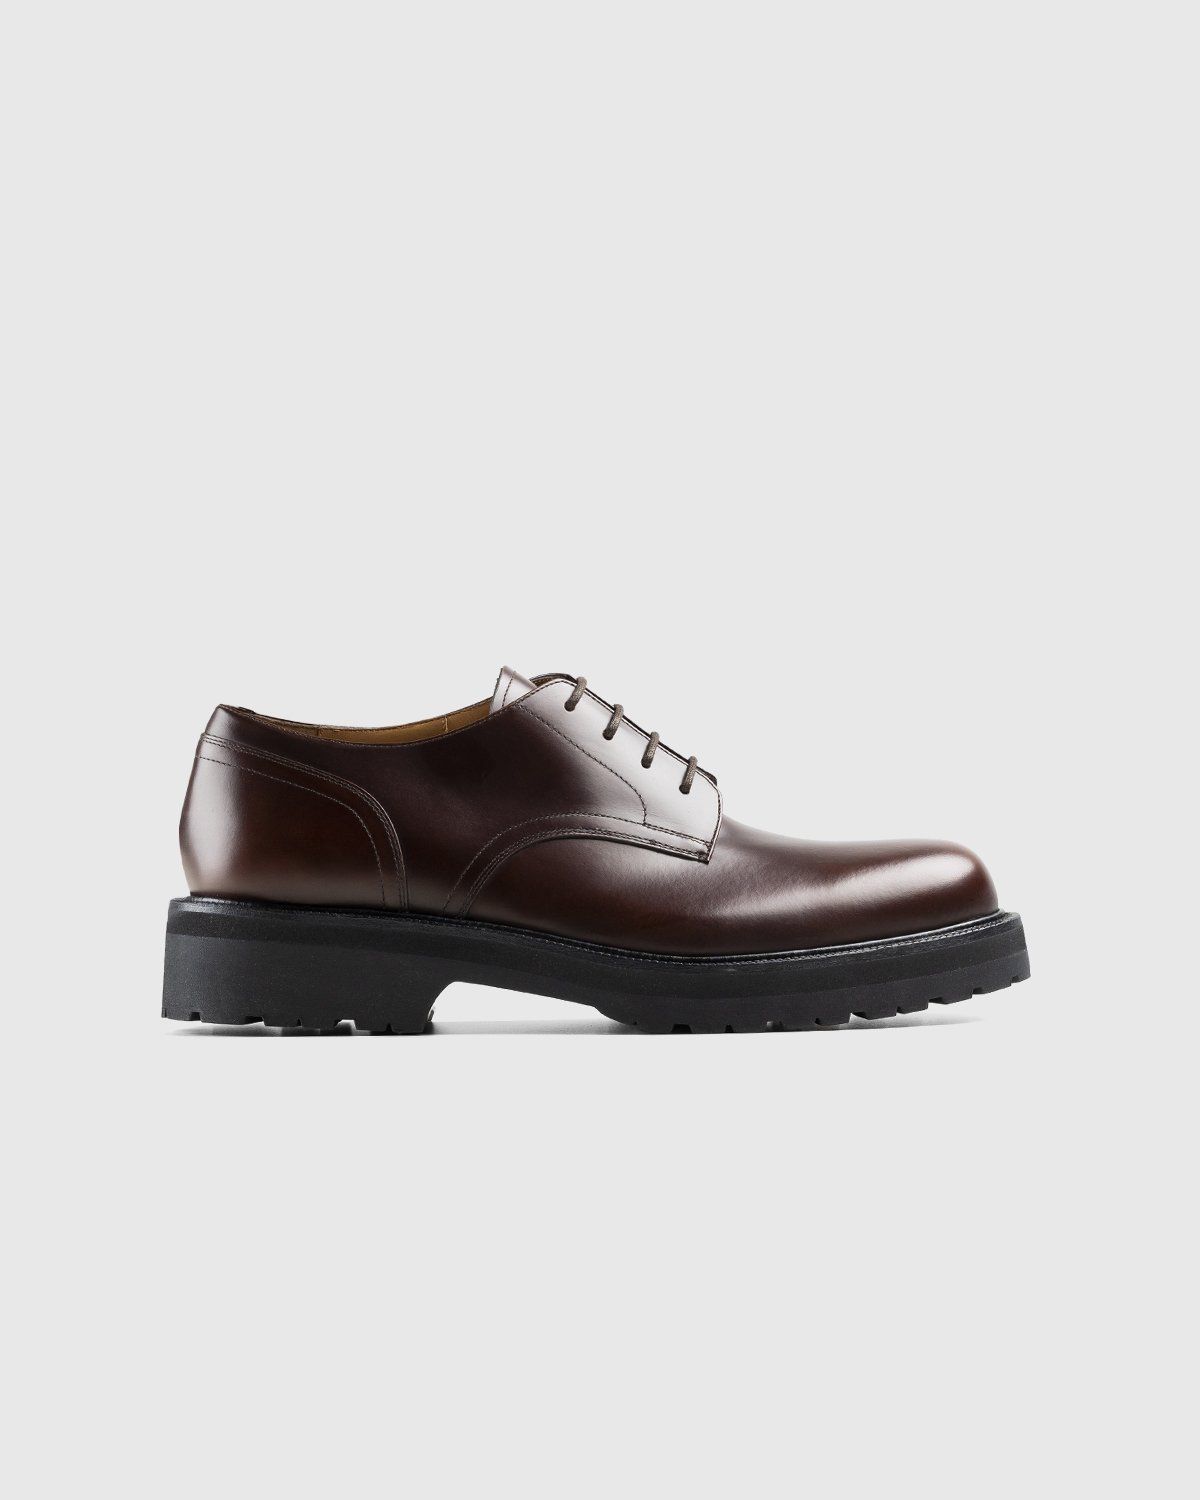 Dries Van Noten – Leather Lace-Up Derby Shoes Brown - Image 1